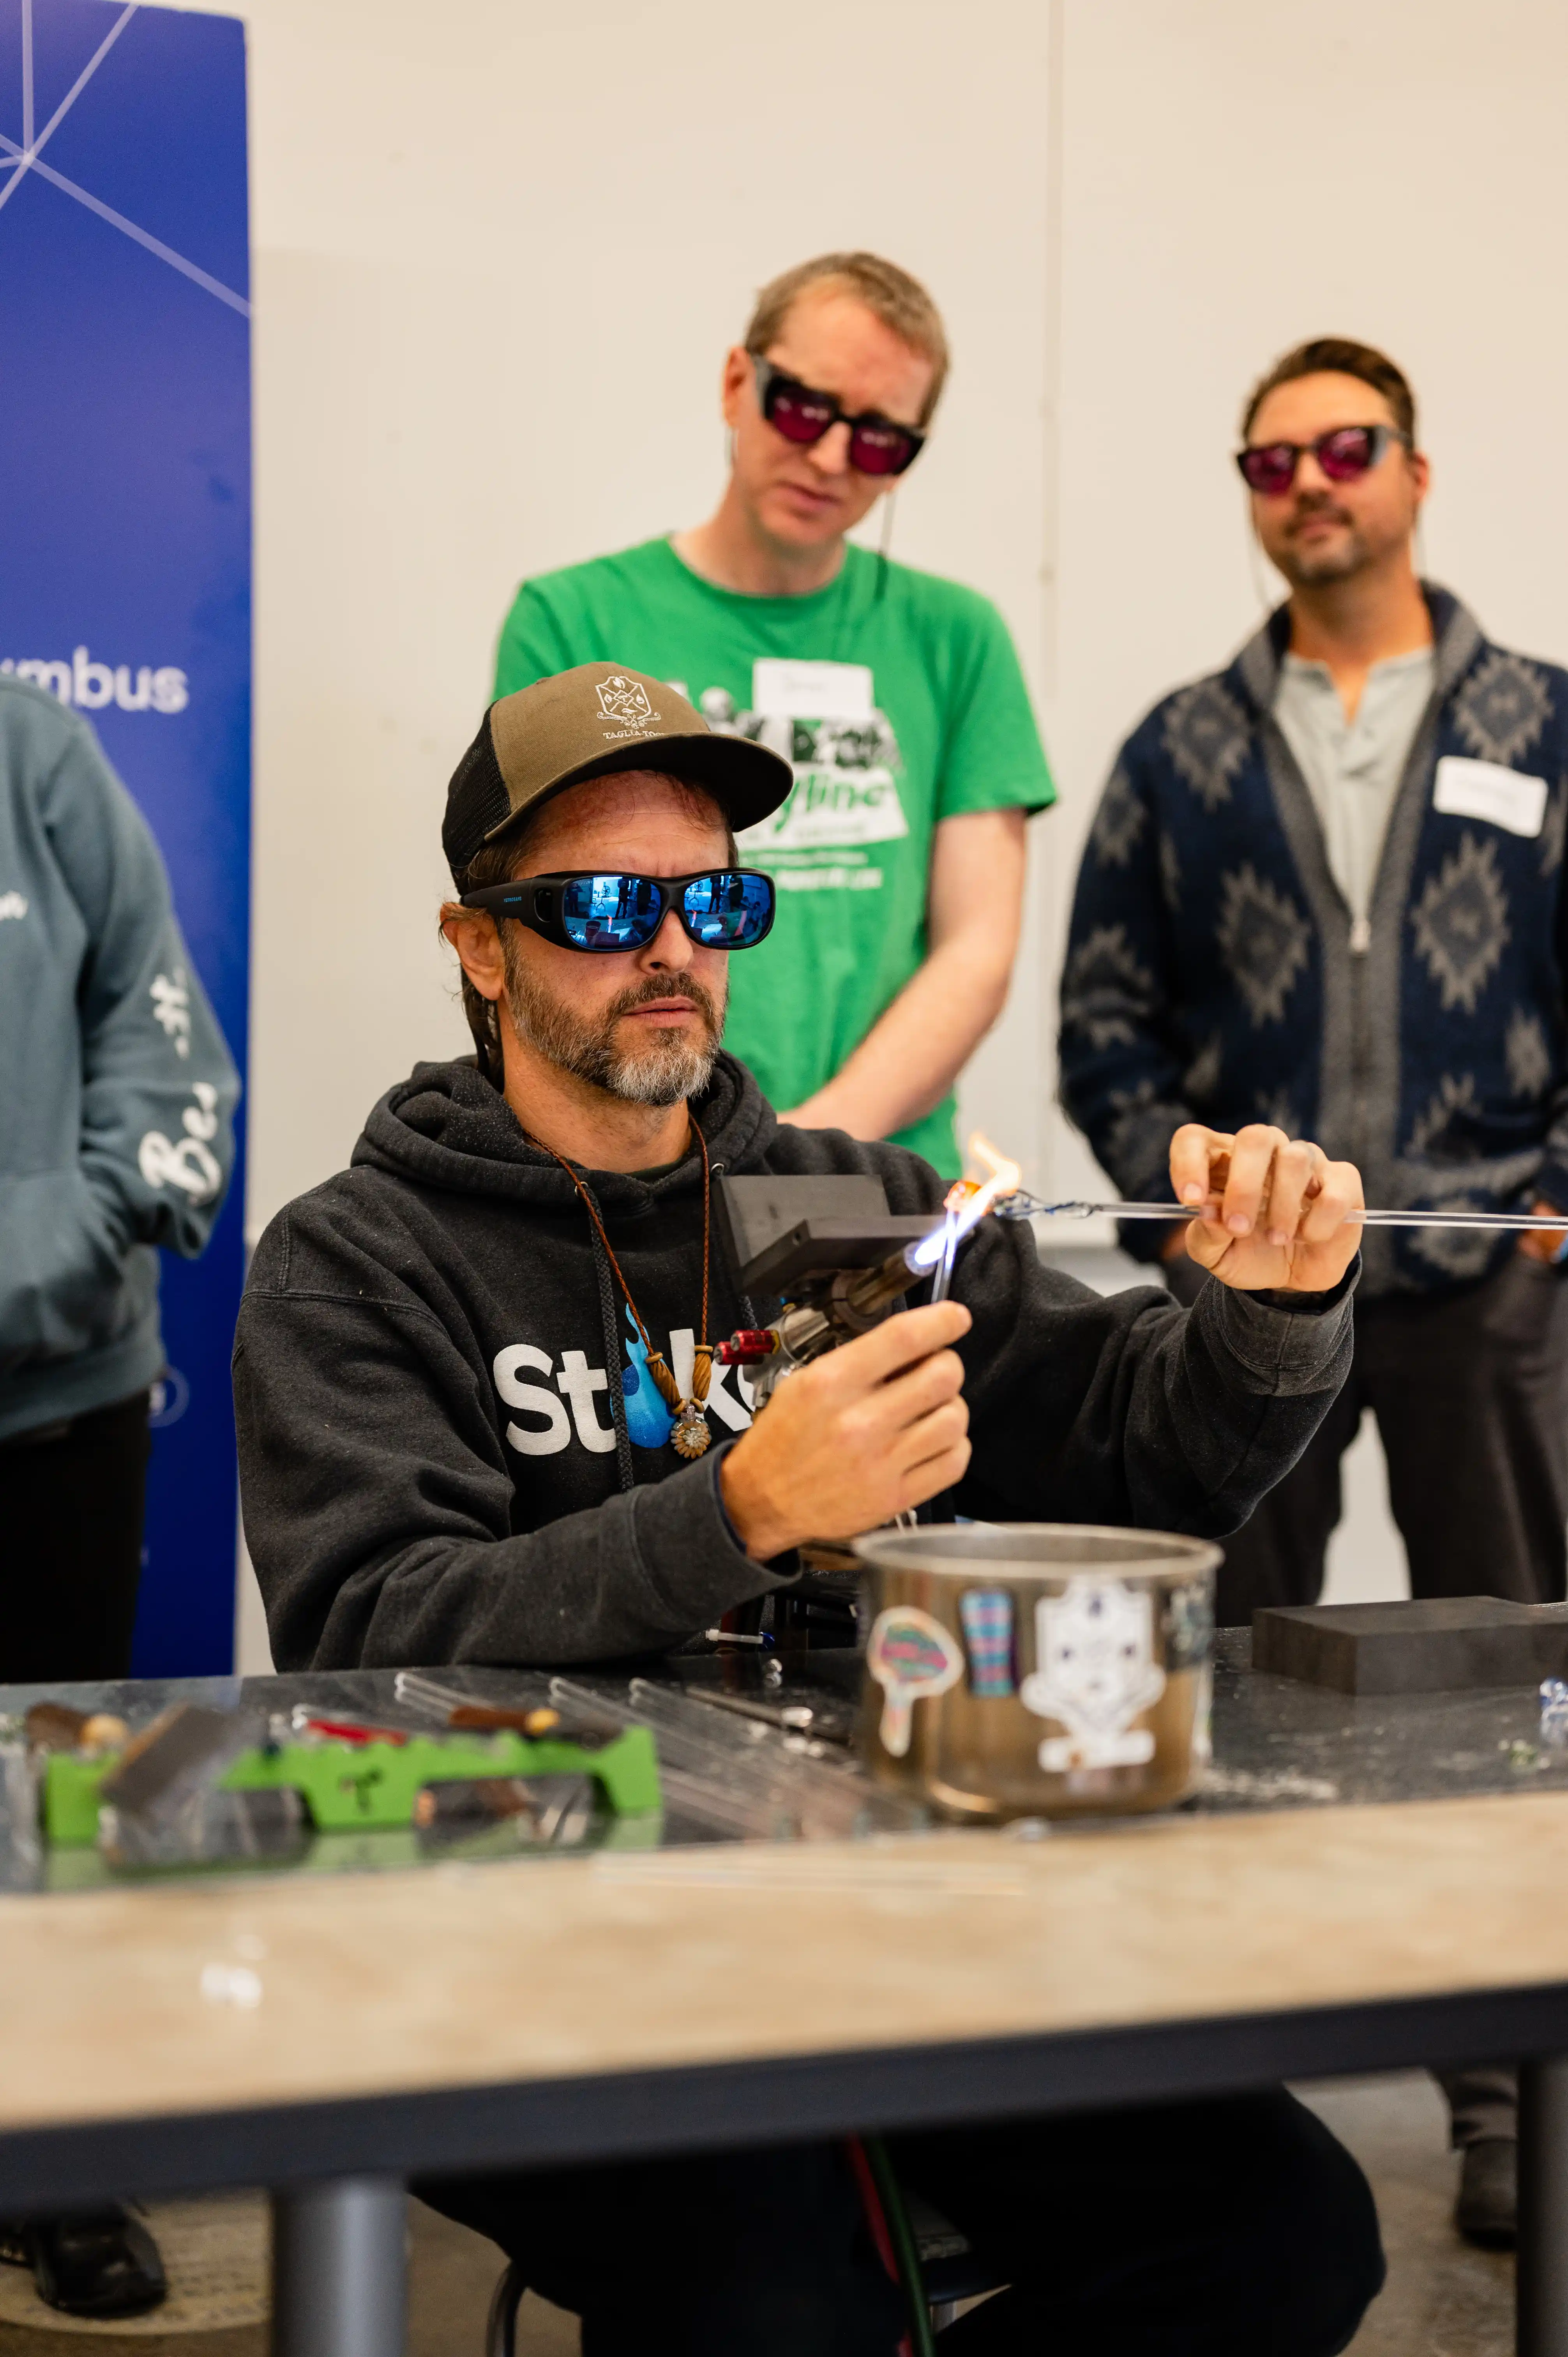 Man wearing sunglasses and a hat doing glassblowing with a torch, with two observers wearing protective eyewear in the background.